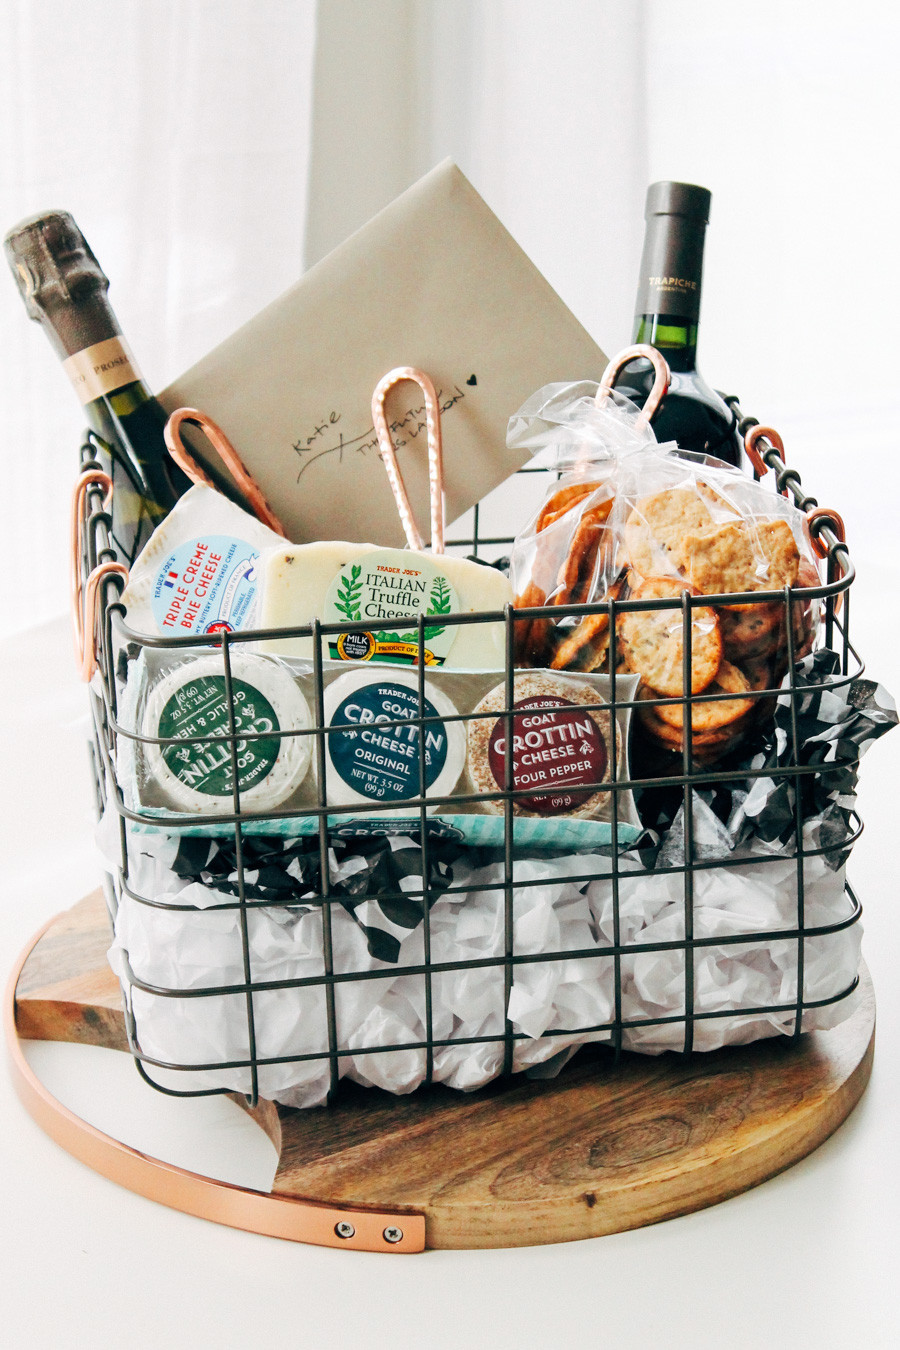 Champagne Gift Basket Ideas
 the ultimate cheese t basket playswellwithbutter